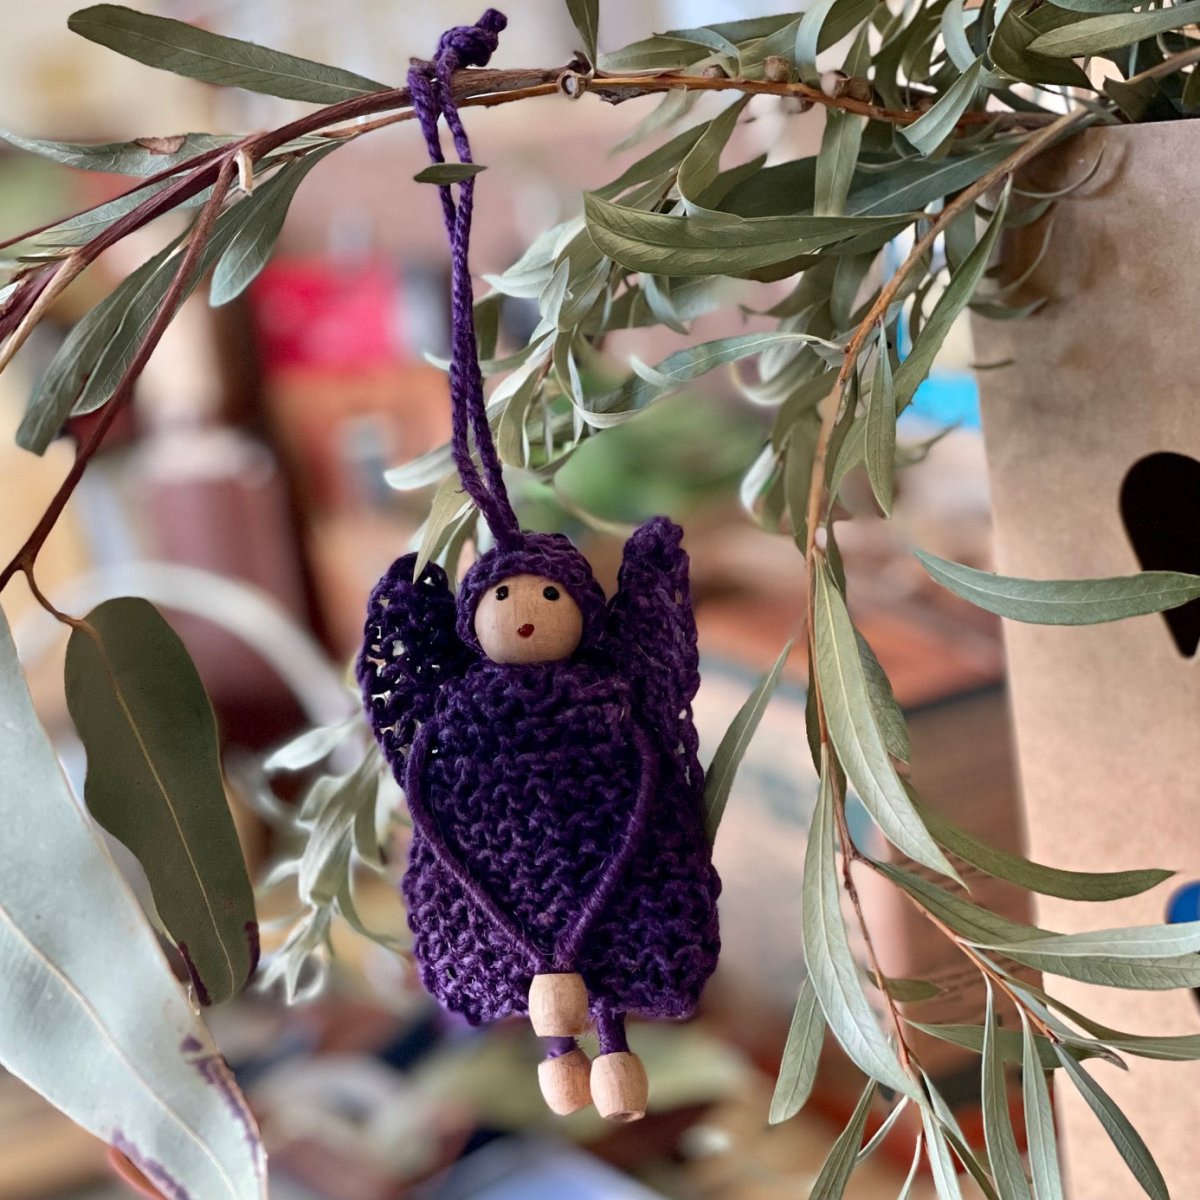 Hanging Christmas Decoration, Purple Angel with Wings made from Dyed Hemp and Wooden Beads.